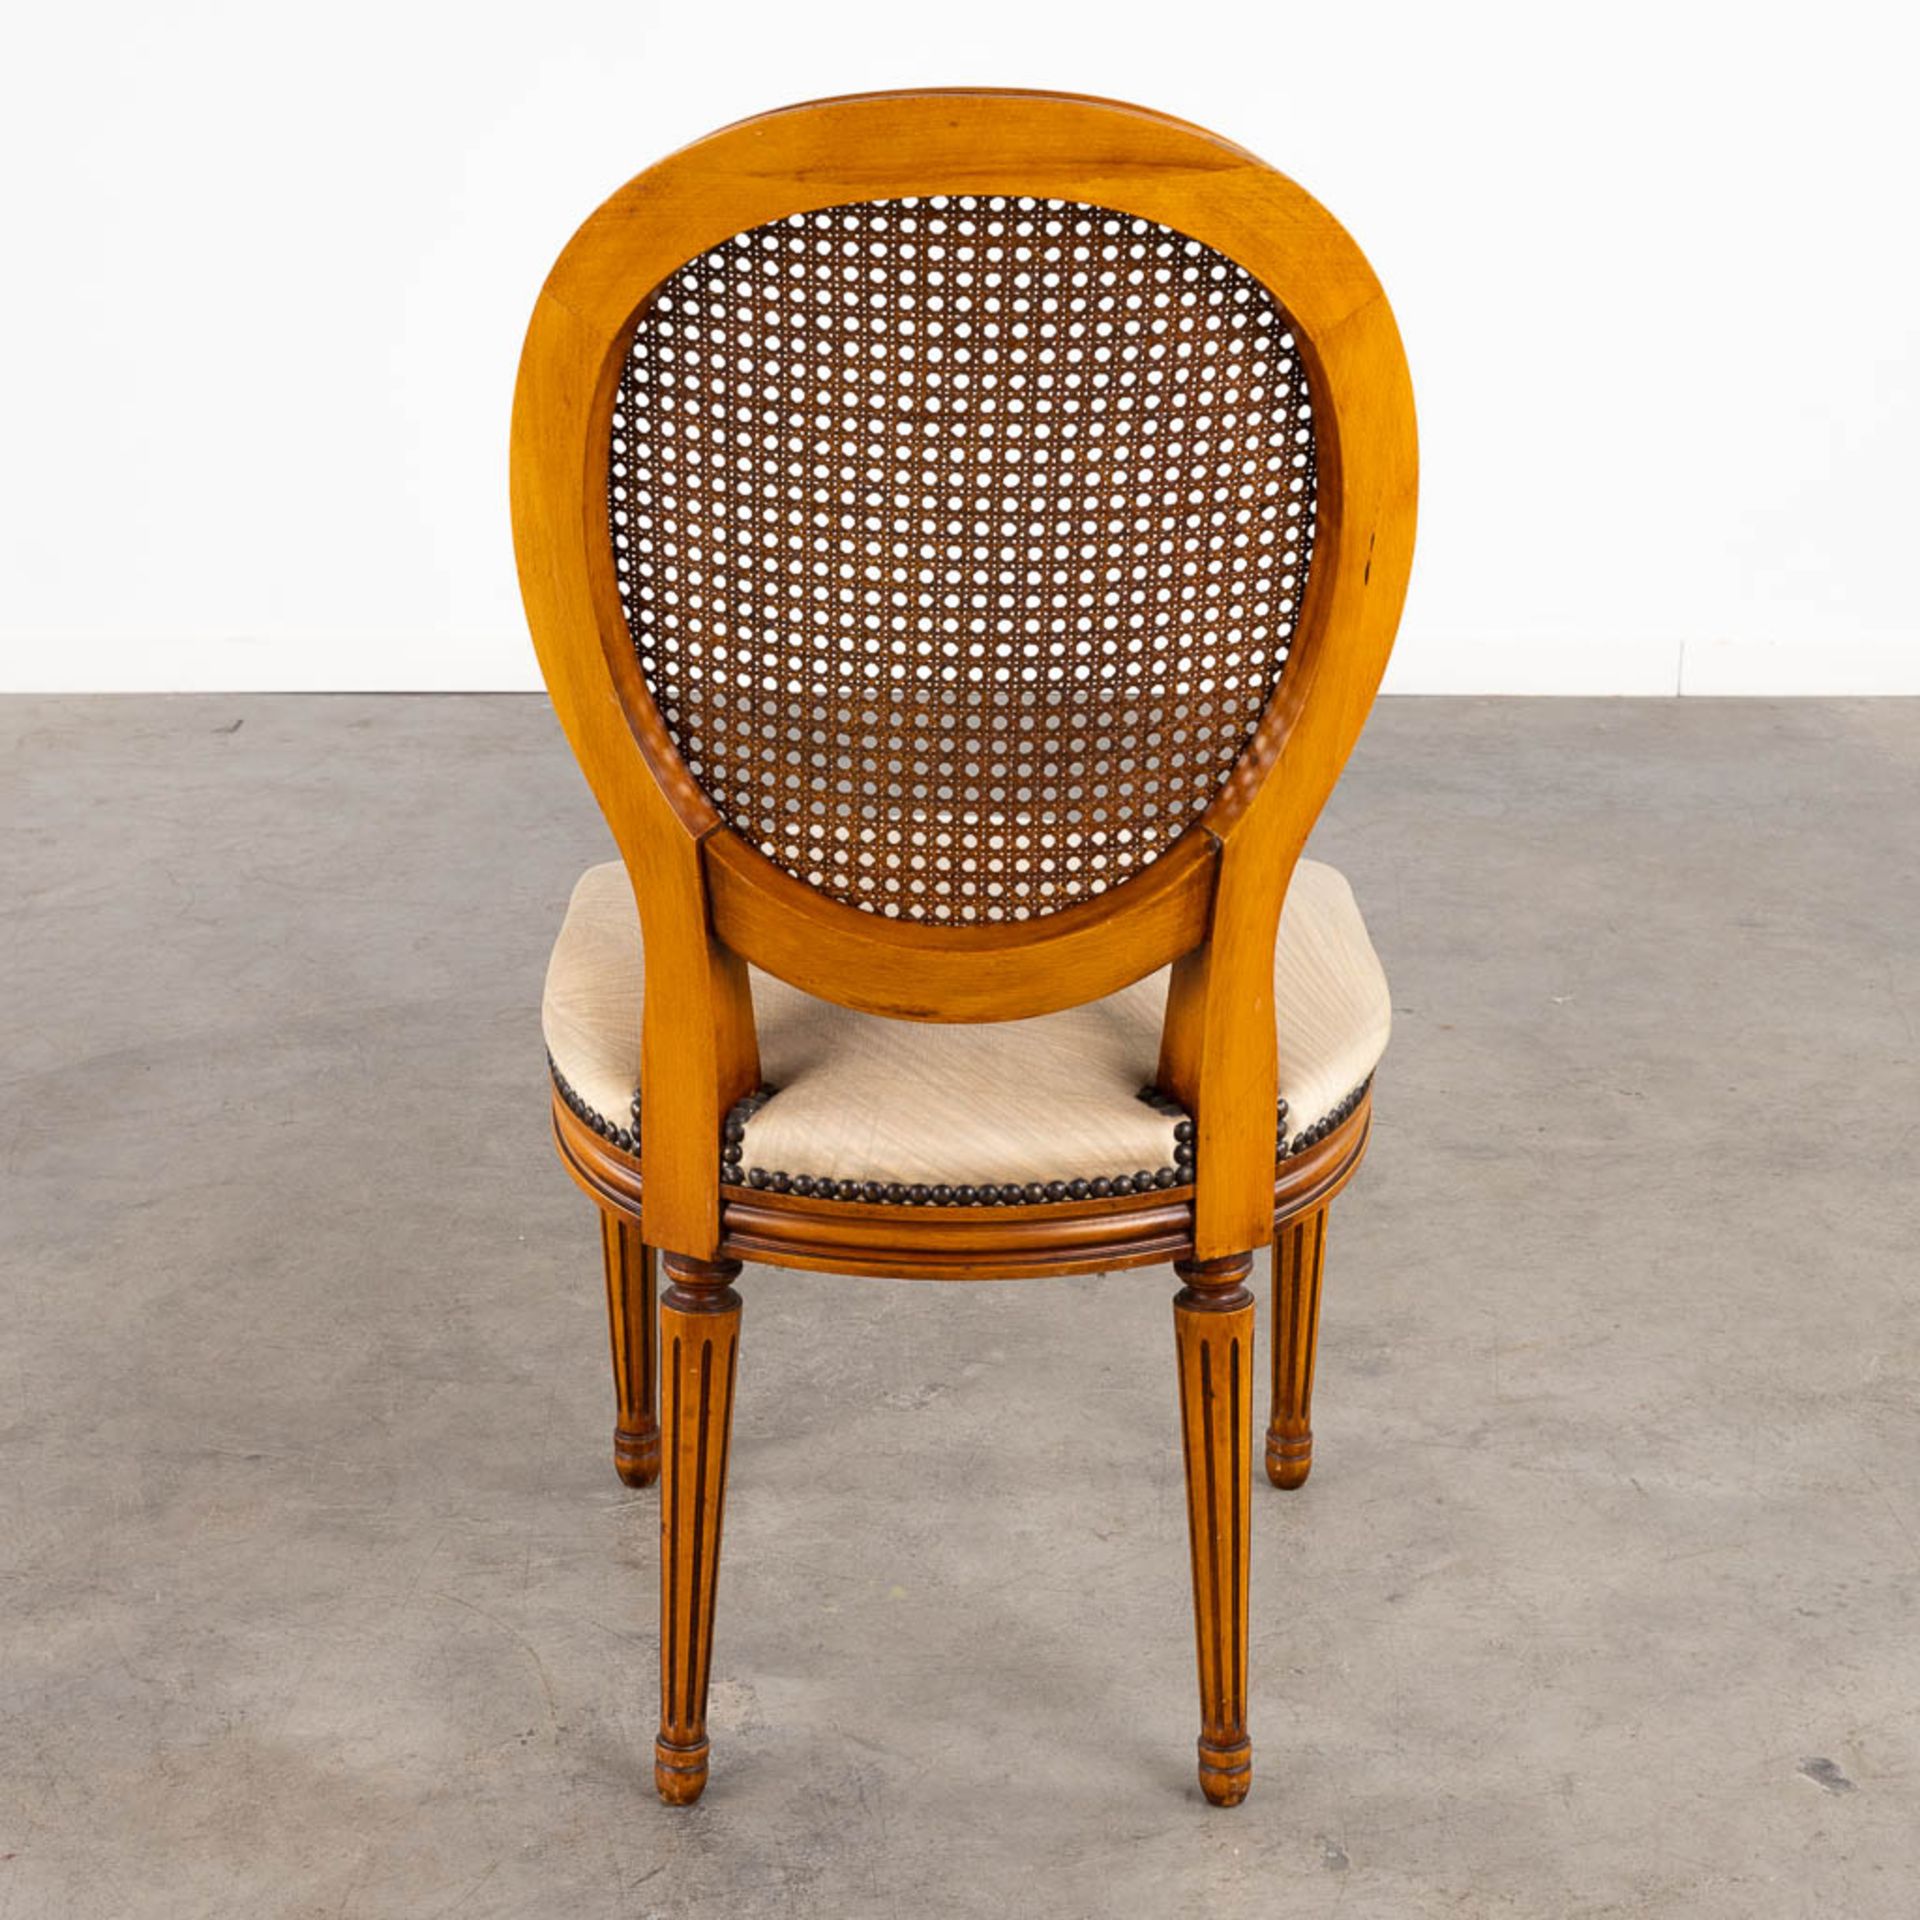 Giorgetti, 8 chairs, Louis XVI style finished with caning. (D:48 x W:48 x H:95 cm) - Image 8 of 13